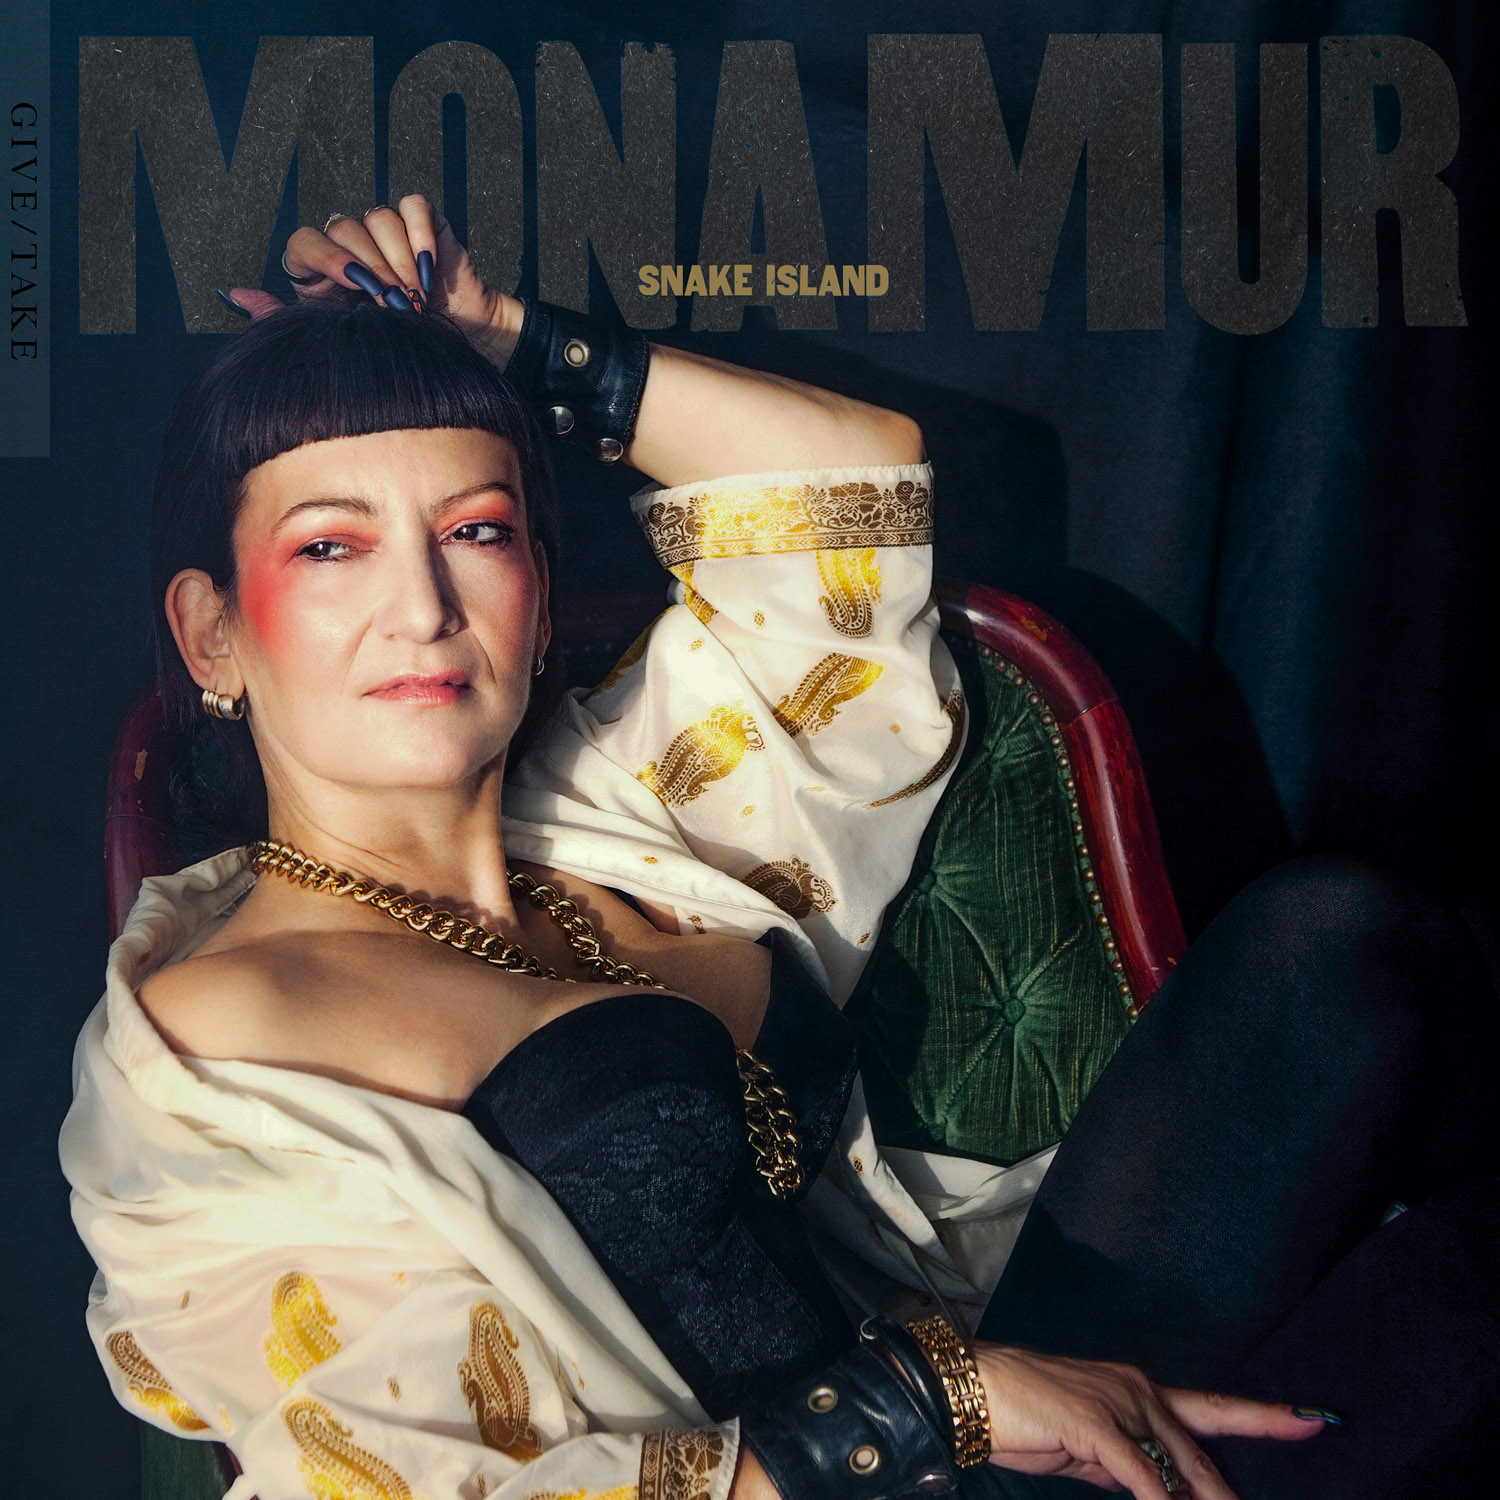 Cover Mona Mur Re-Issue 2021